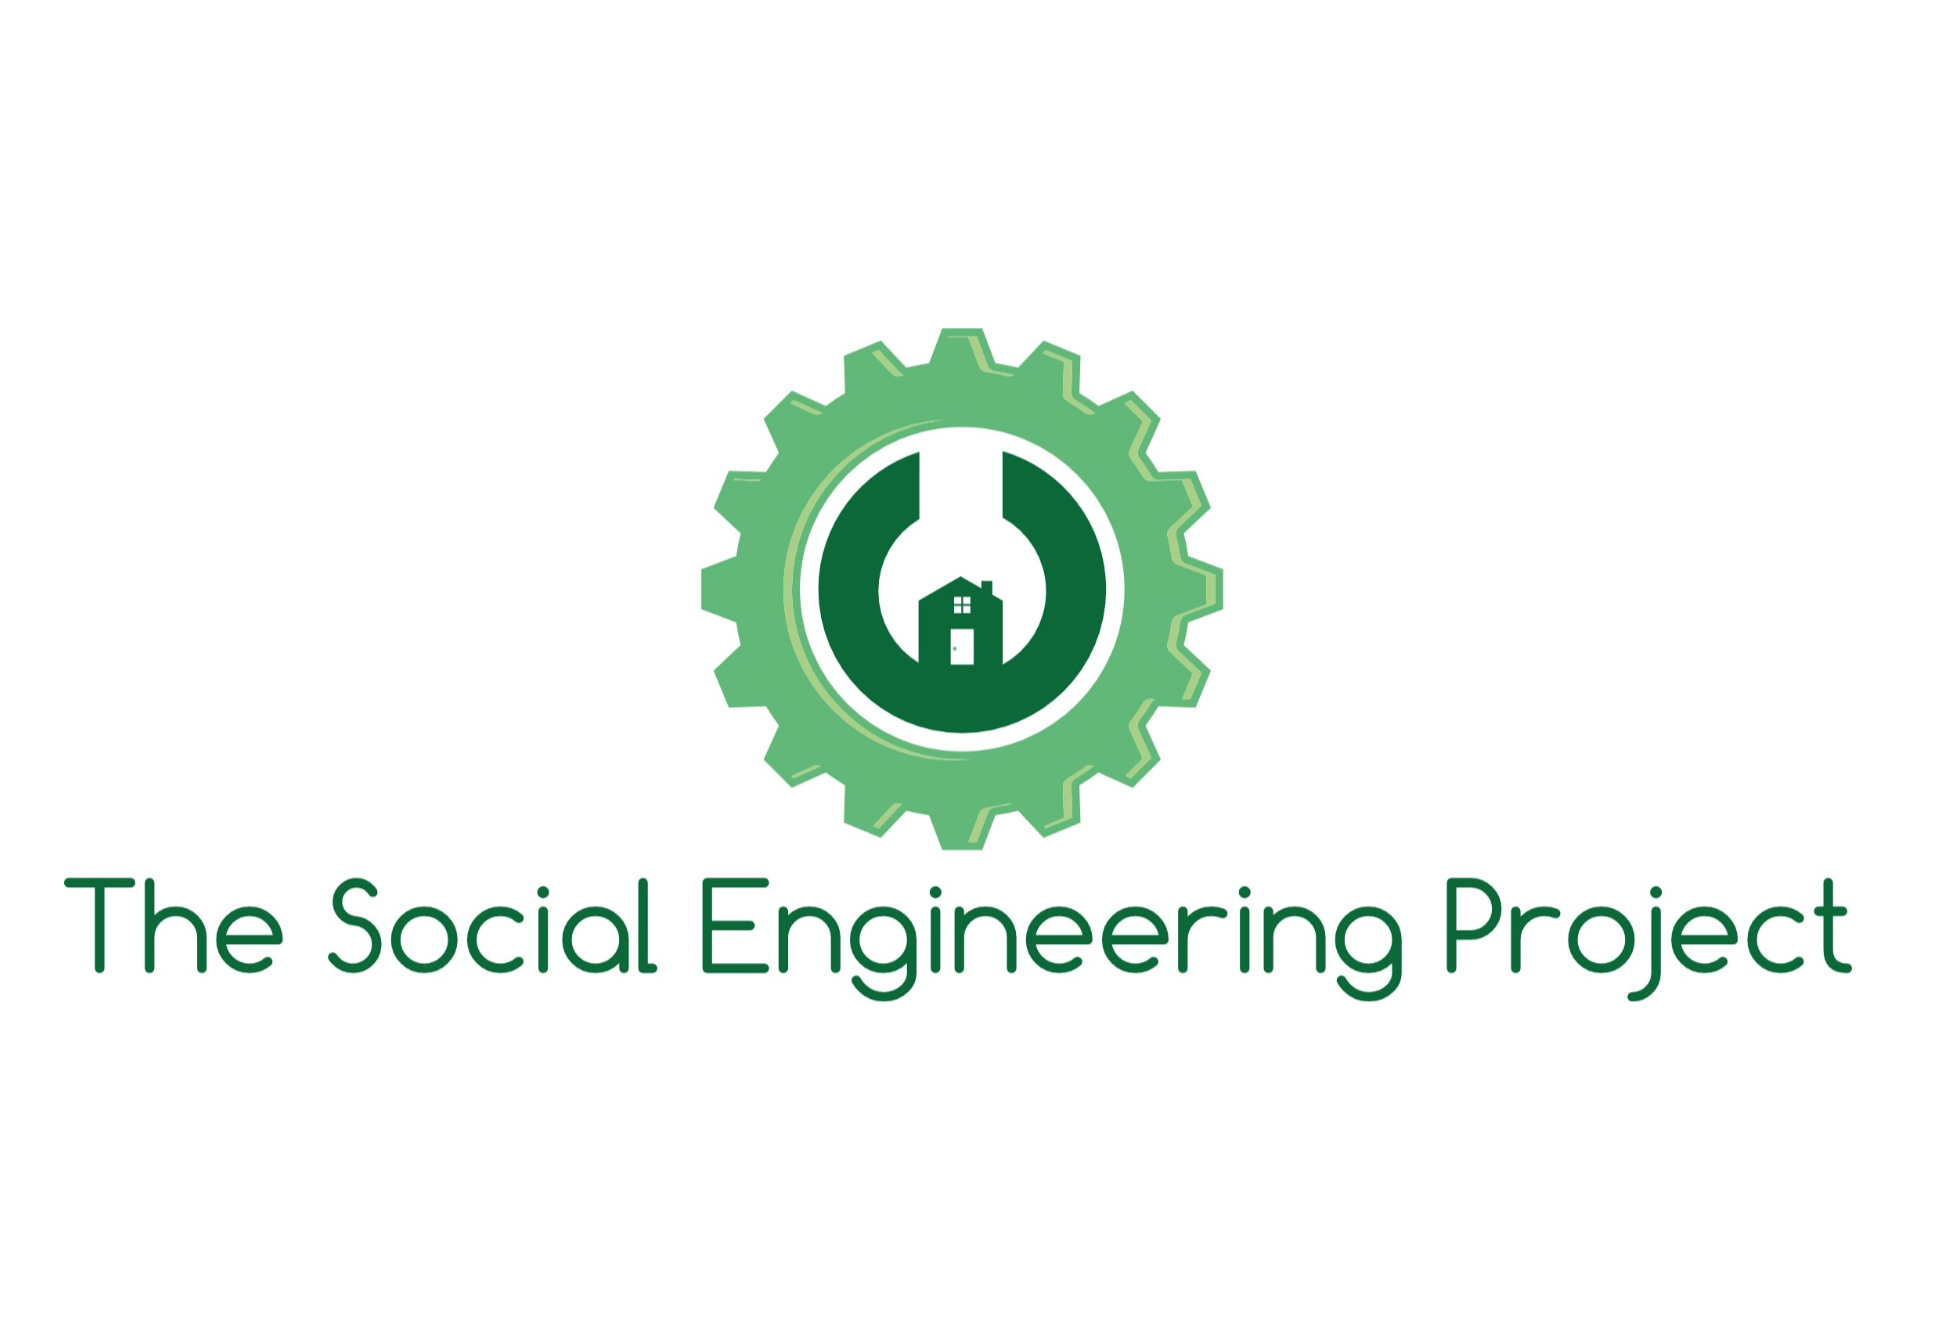 The Social Engineering Project